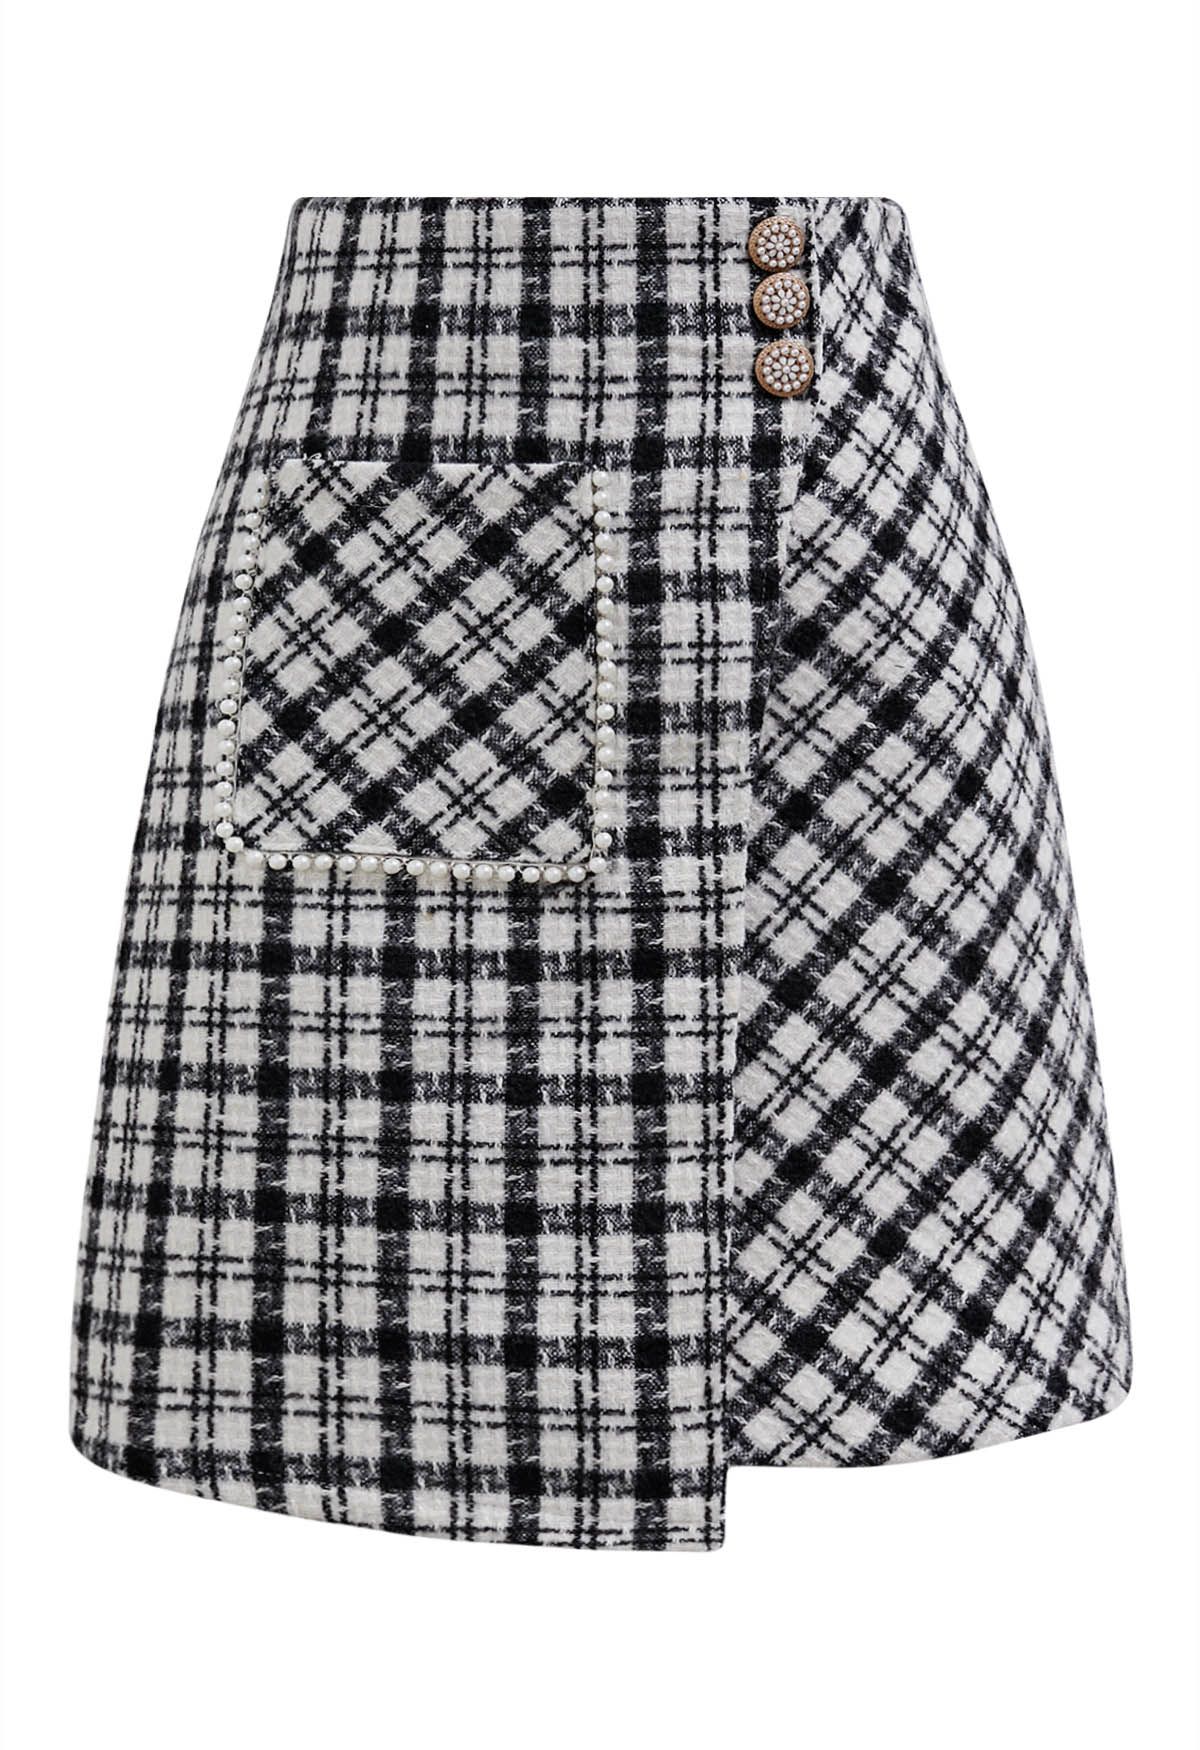 Patch Pocket Plaid Tweed Flap Skirt in Black - Retro, Indie and Unique ...